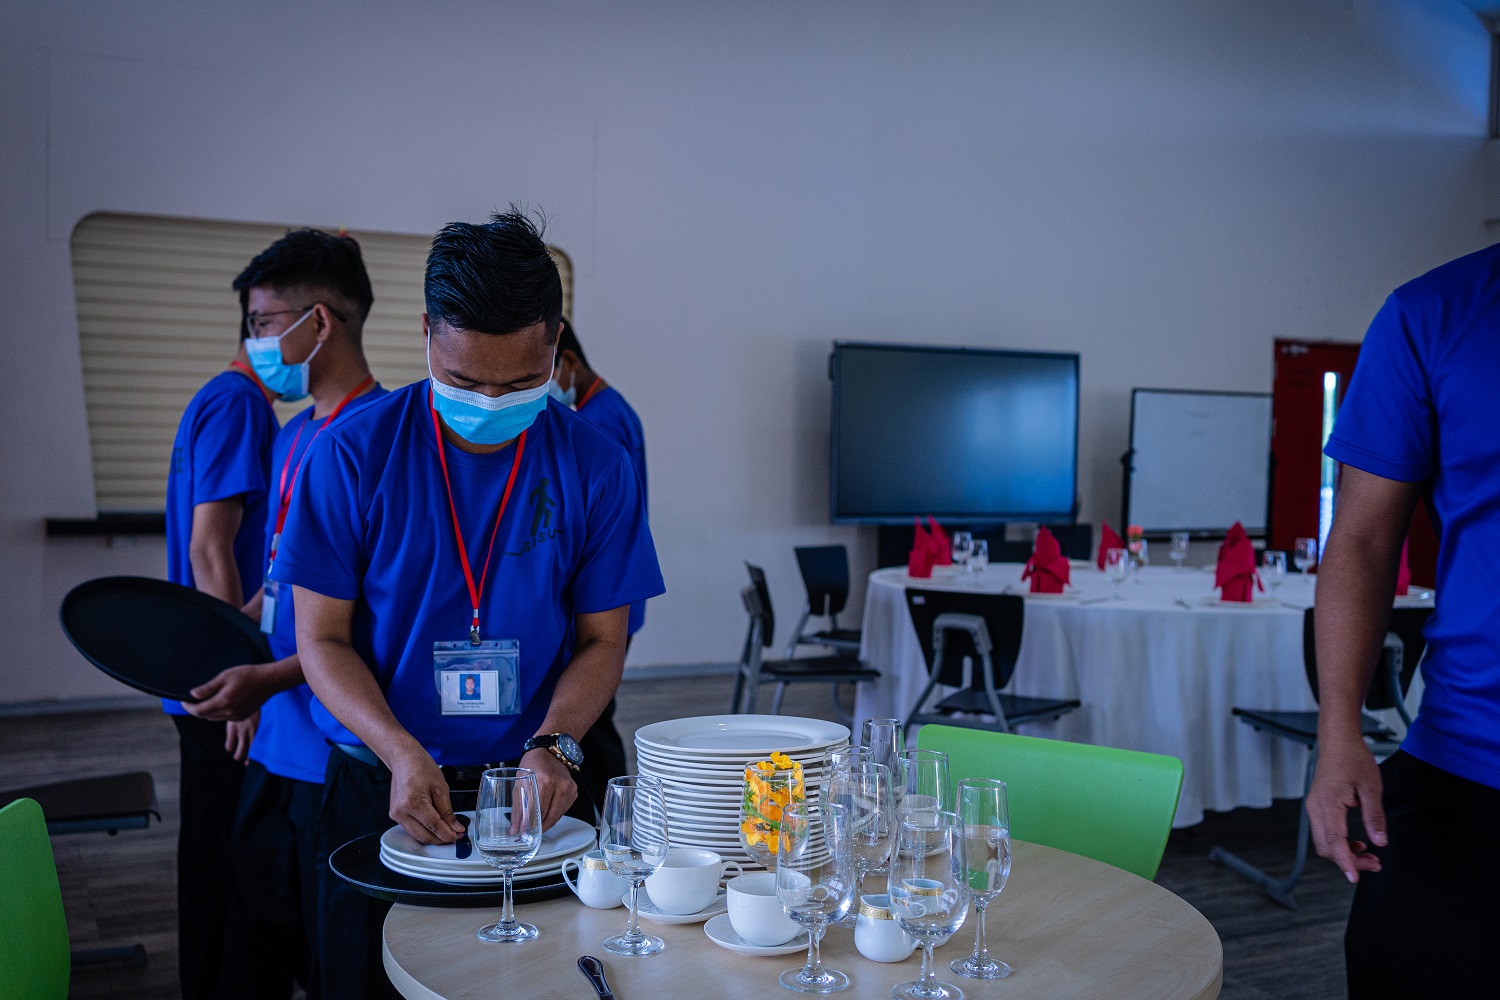 Yan Naing Tun, 24-year-old current SISU student, lays a table as part of his hospitality training